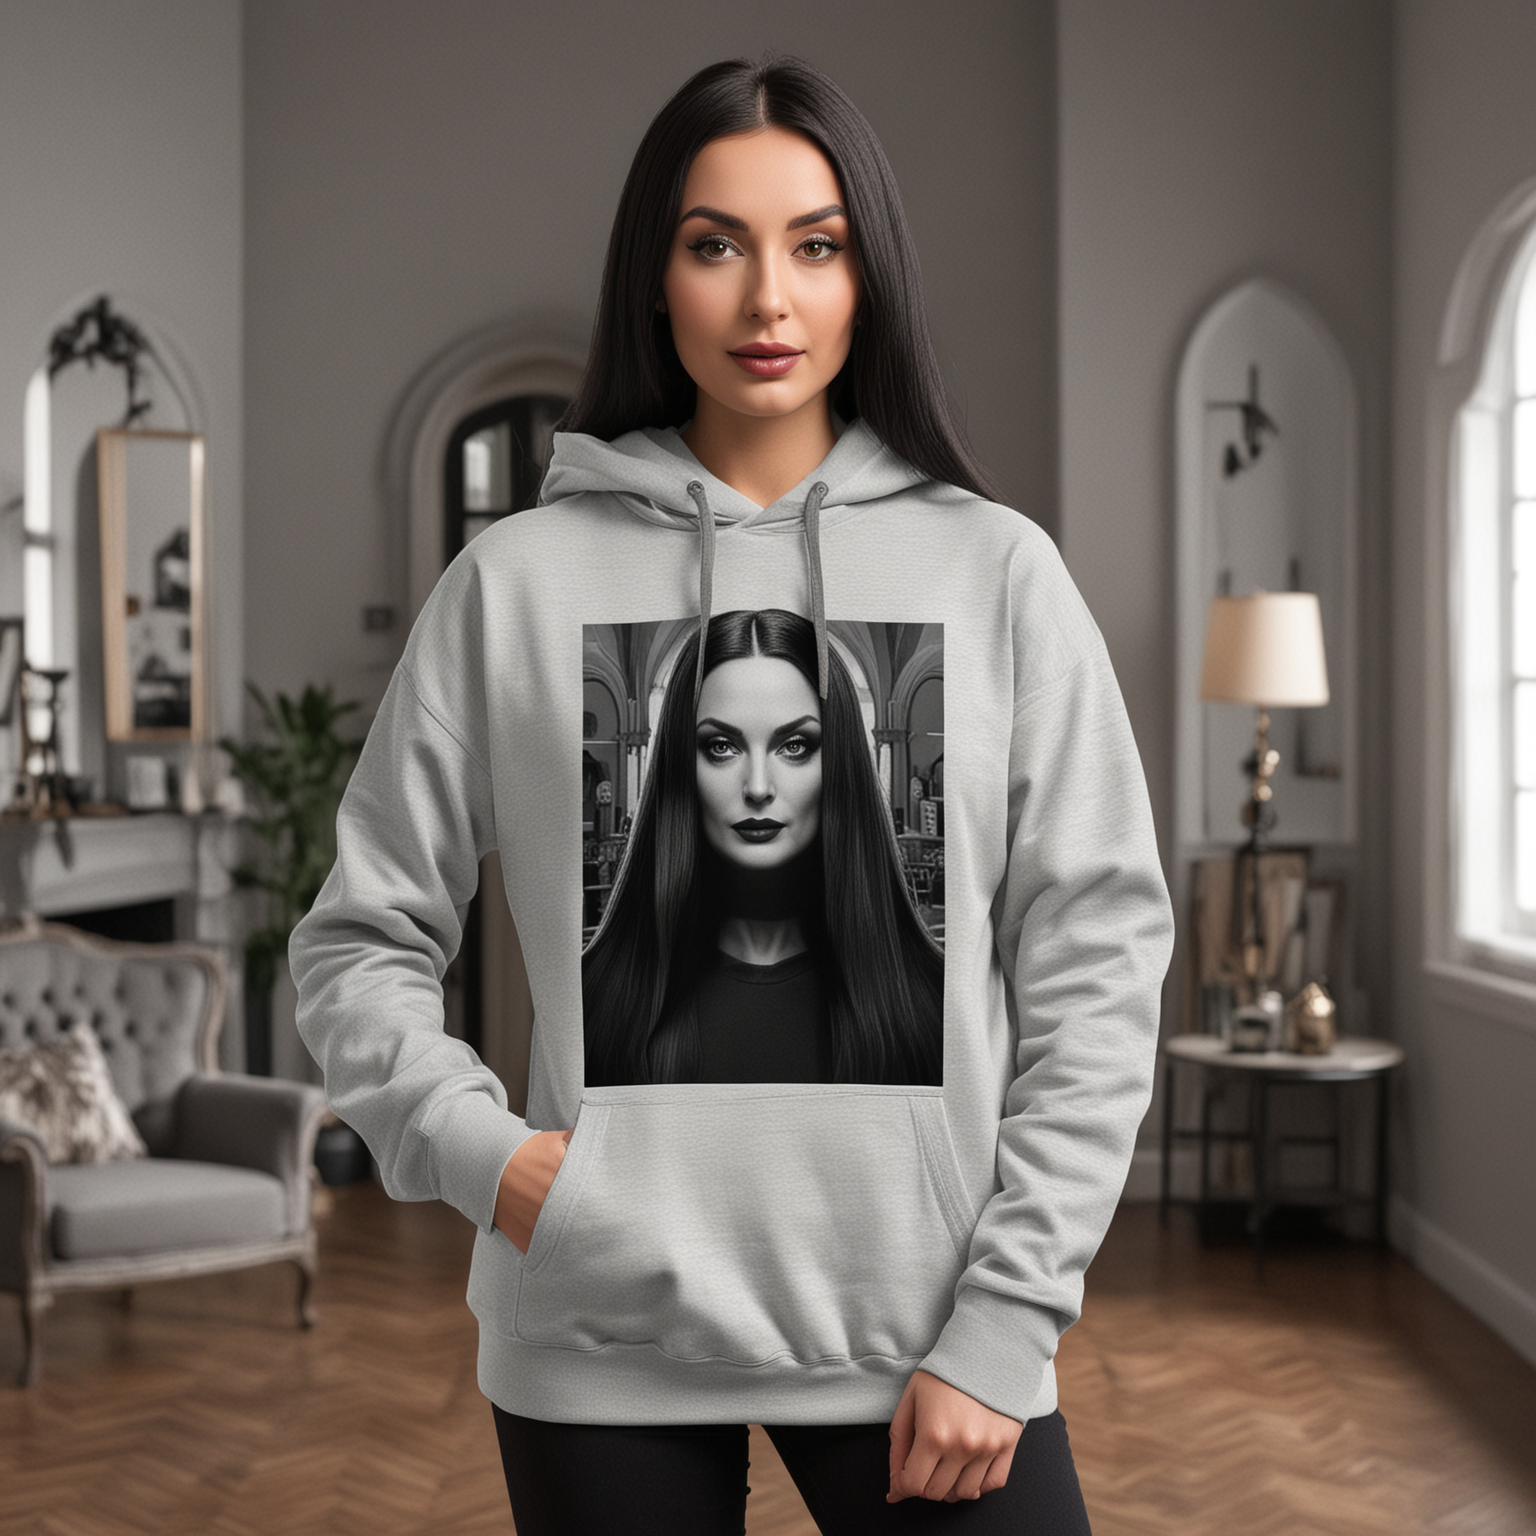 Morticia Addams Inspired Heather Grey Hoodie Mockup in Front of Addams Family House